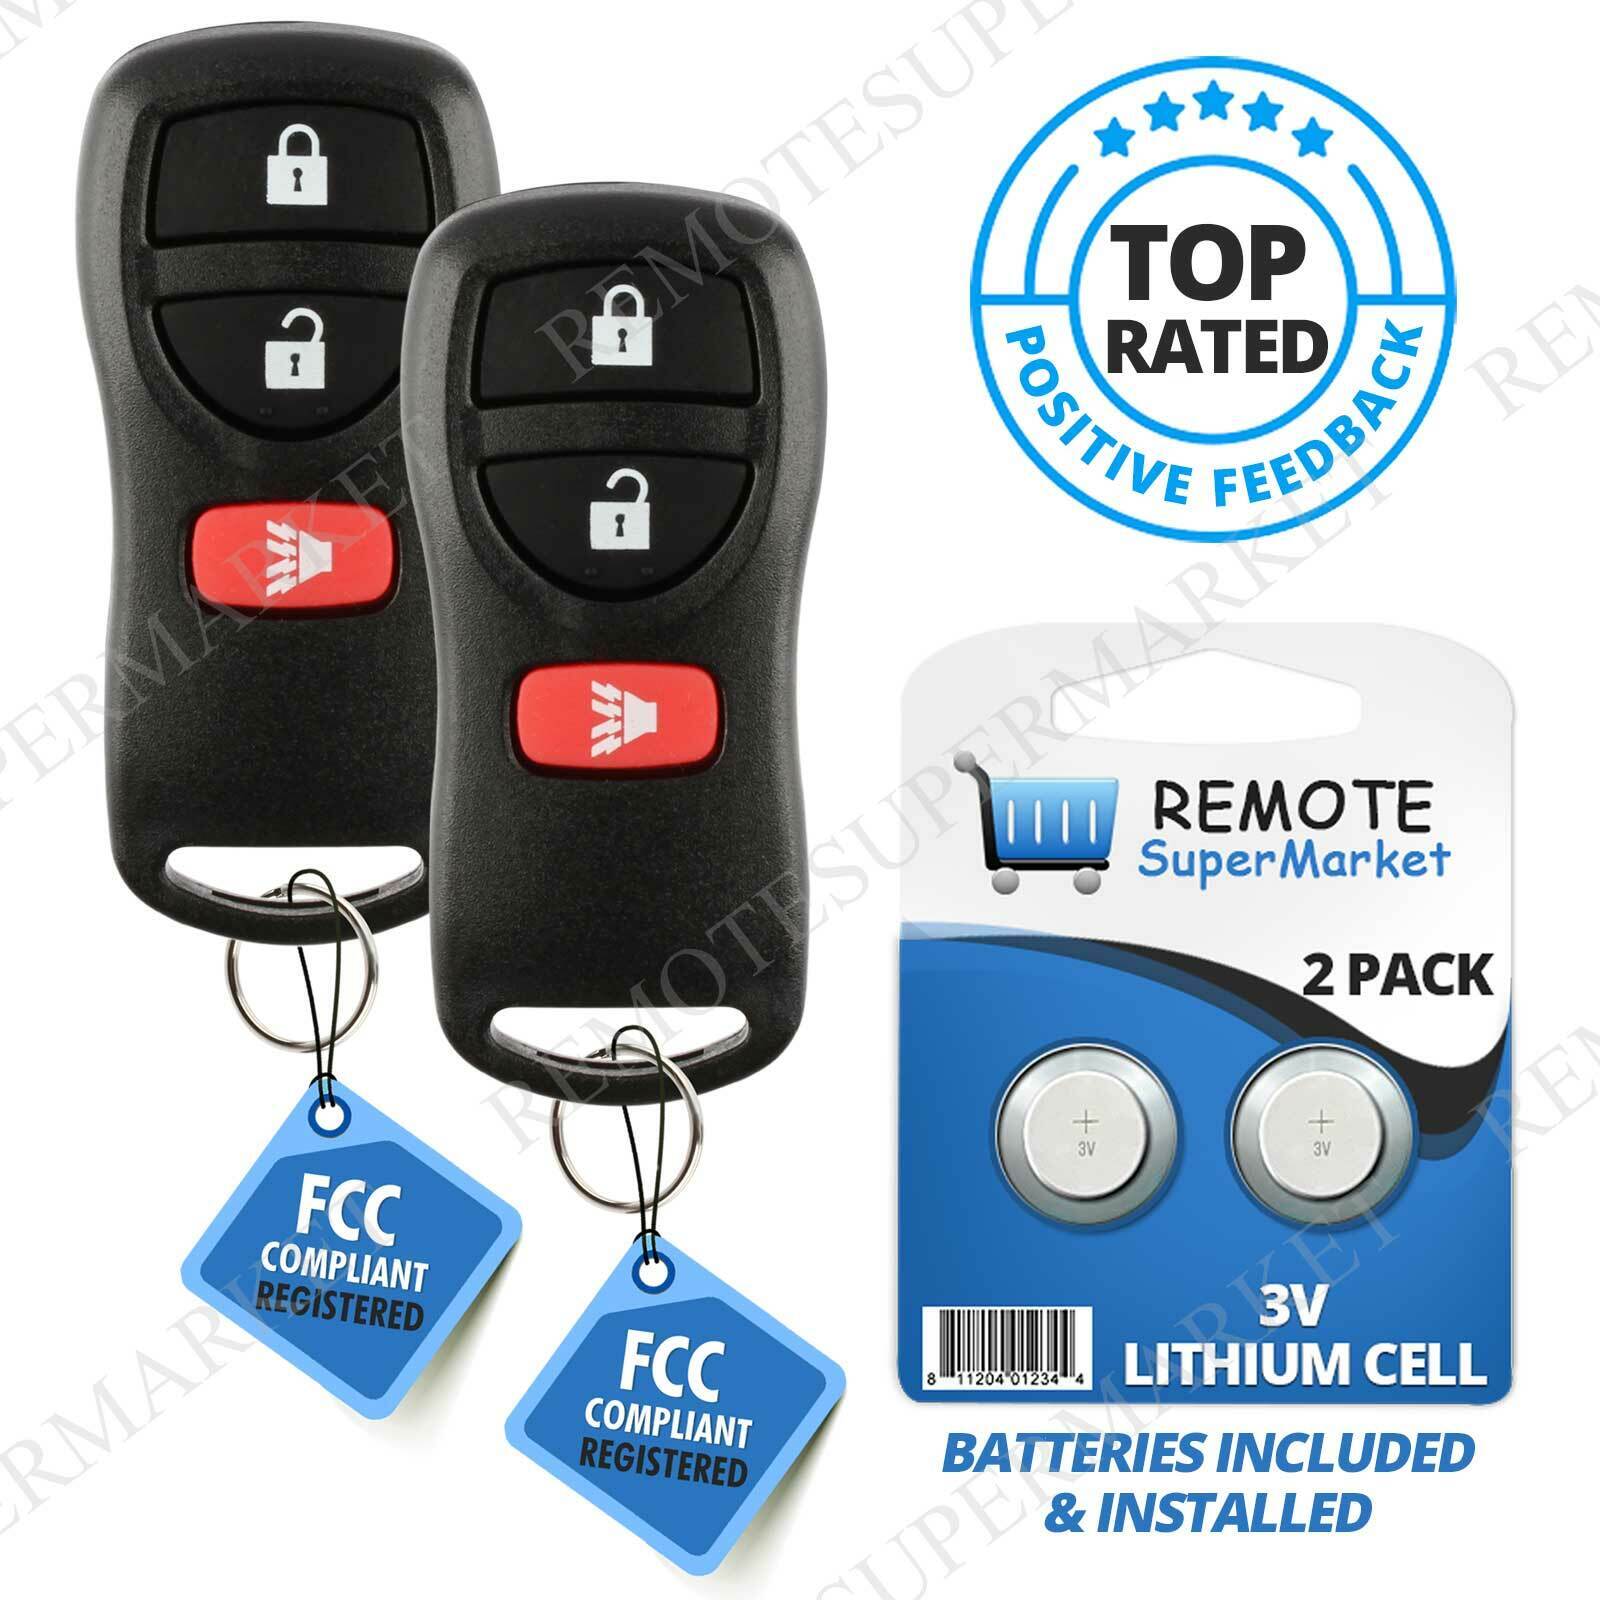 Replacement for Infiniti 02-03 QX4 03-09 FX35 03-08 FX45 Remote Car Key Fob Pair